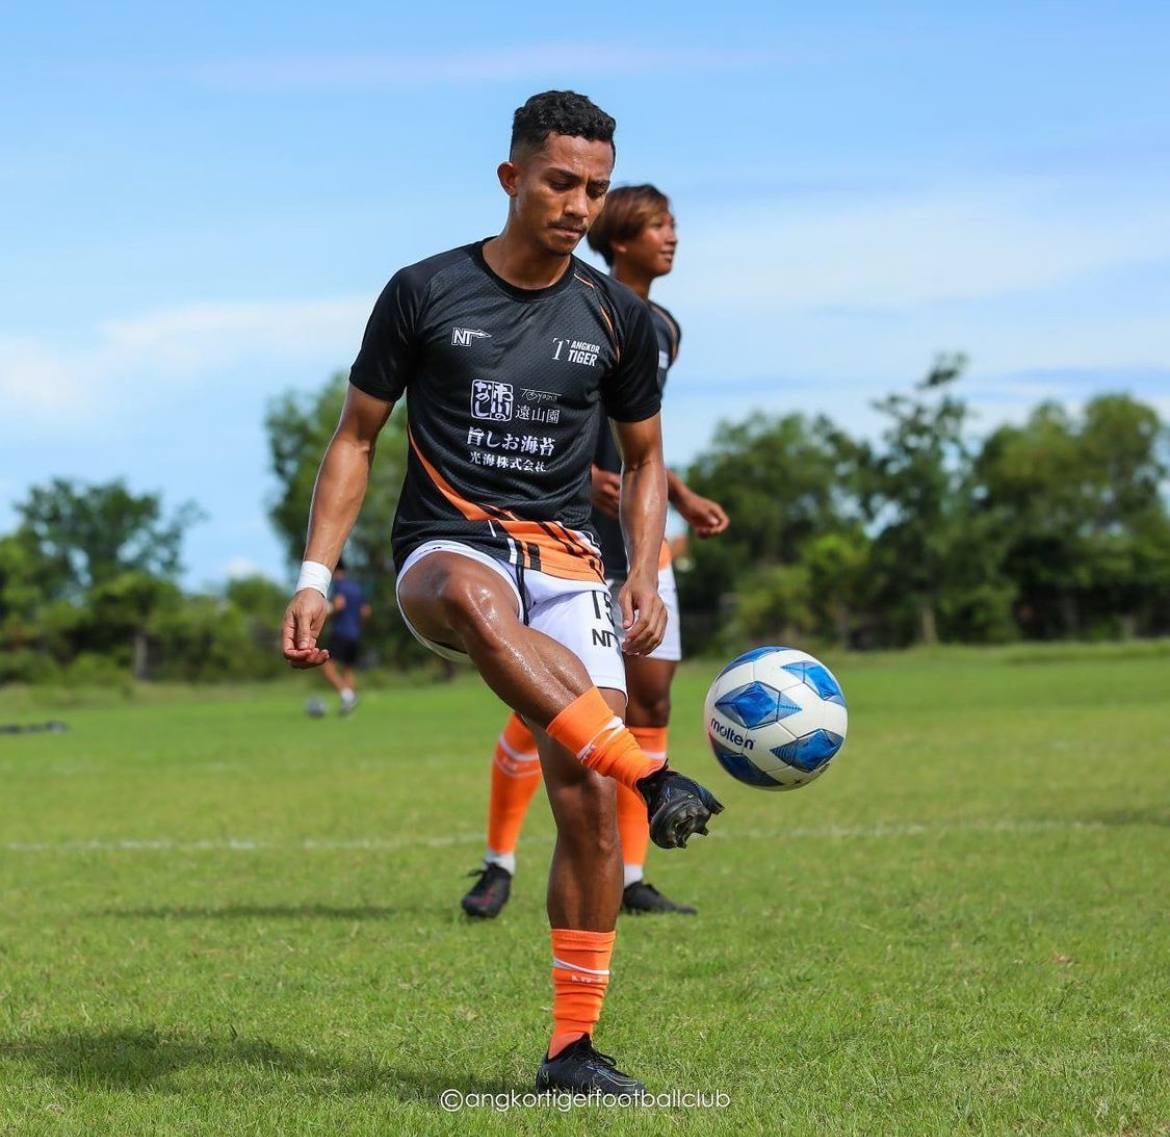 Mouzinho in his training session with Angkor Tiger FC. Photo: Angkor Tigers FC